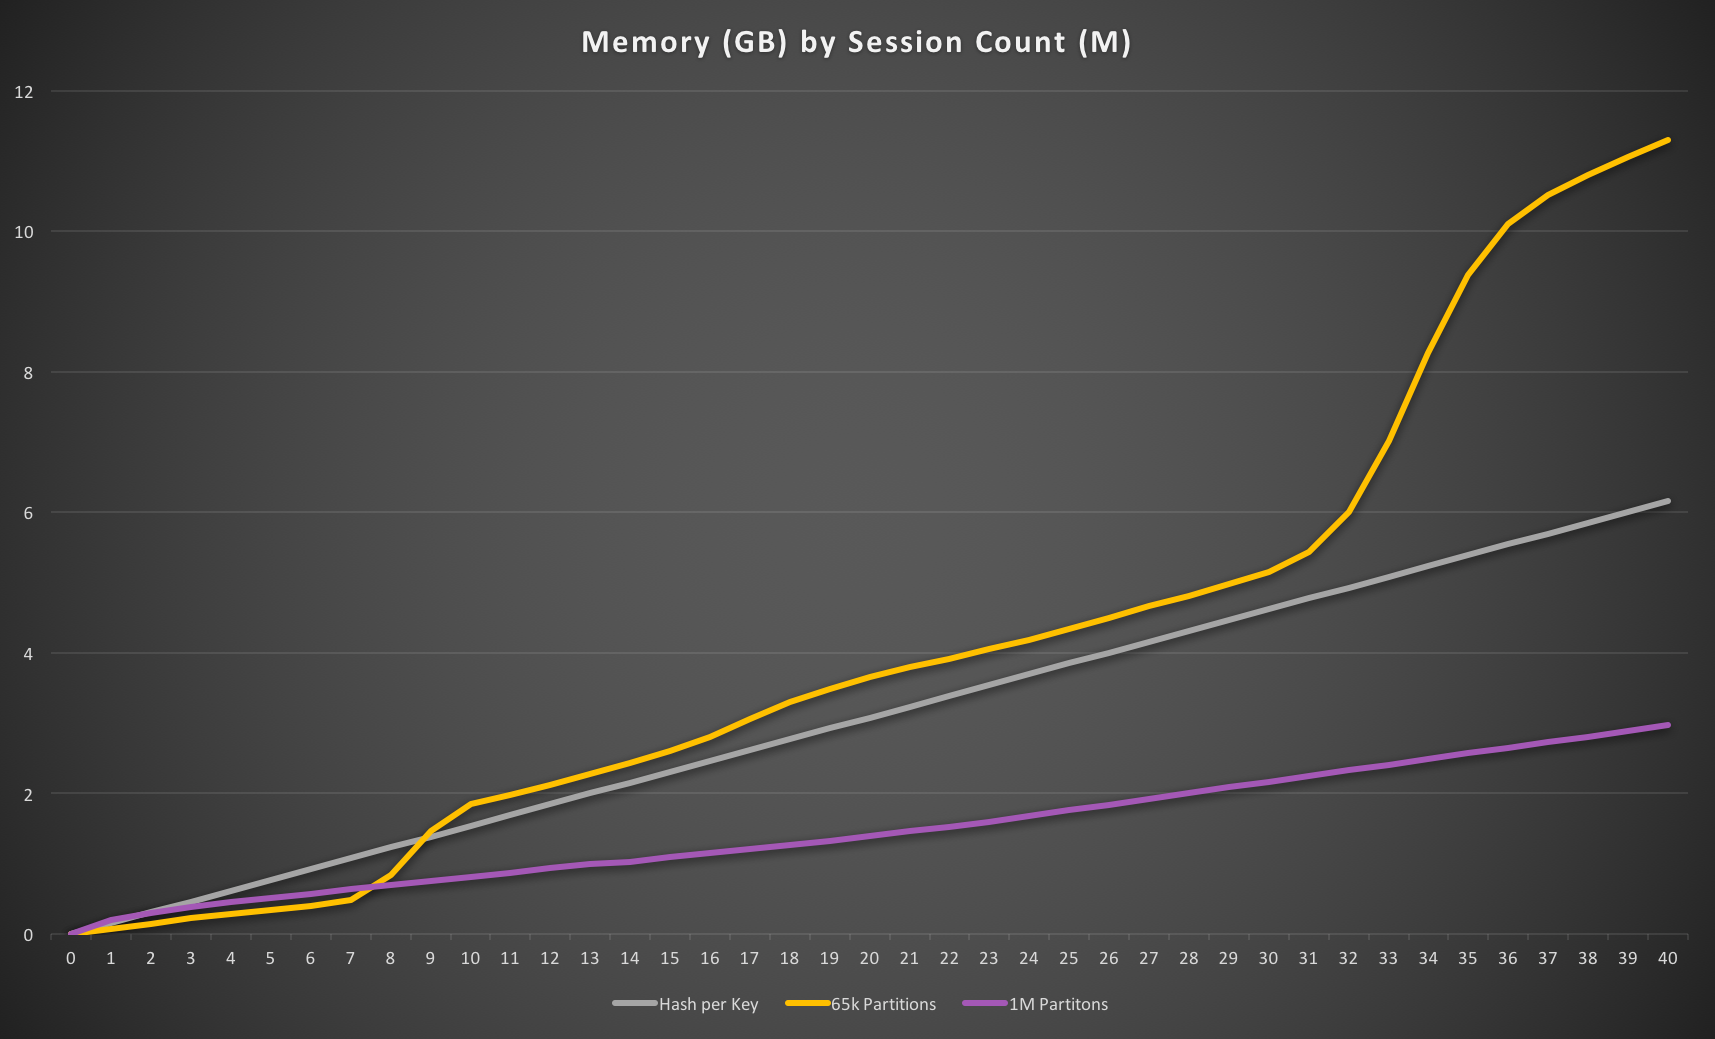 Extended memory usage including 1M partitions